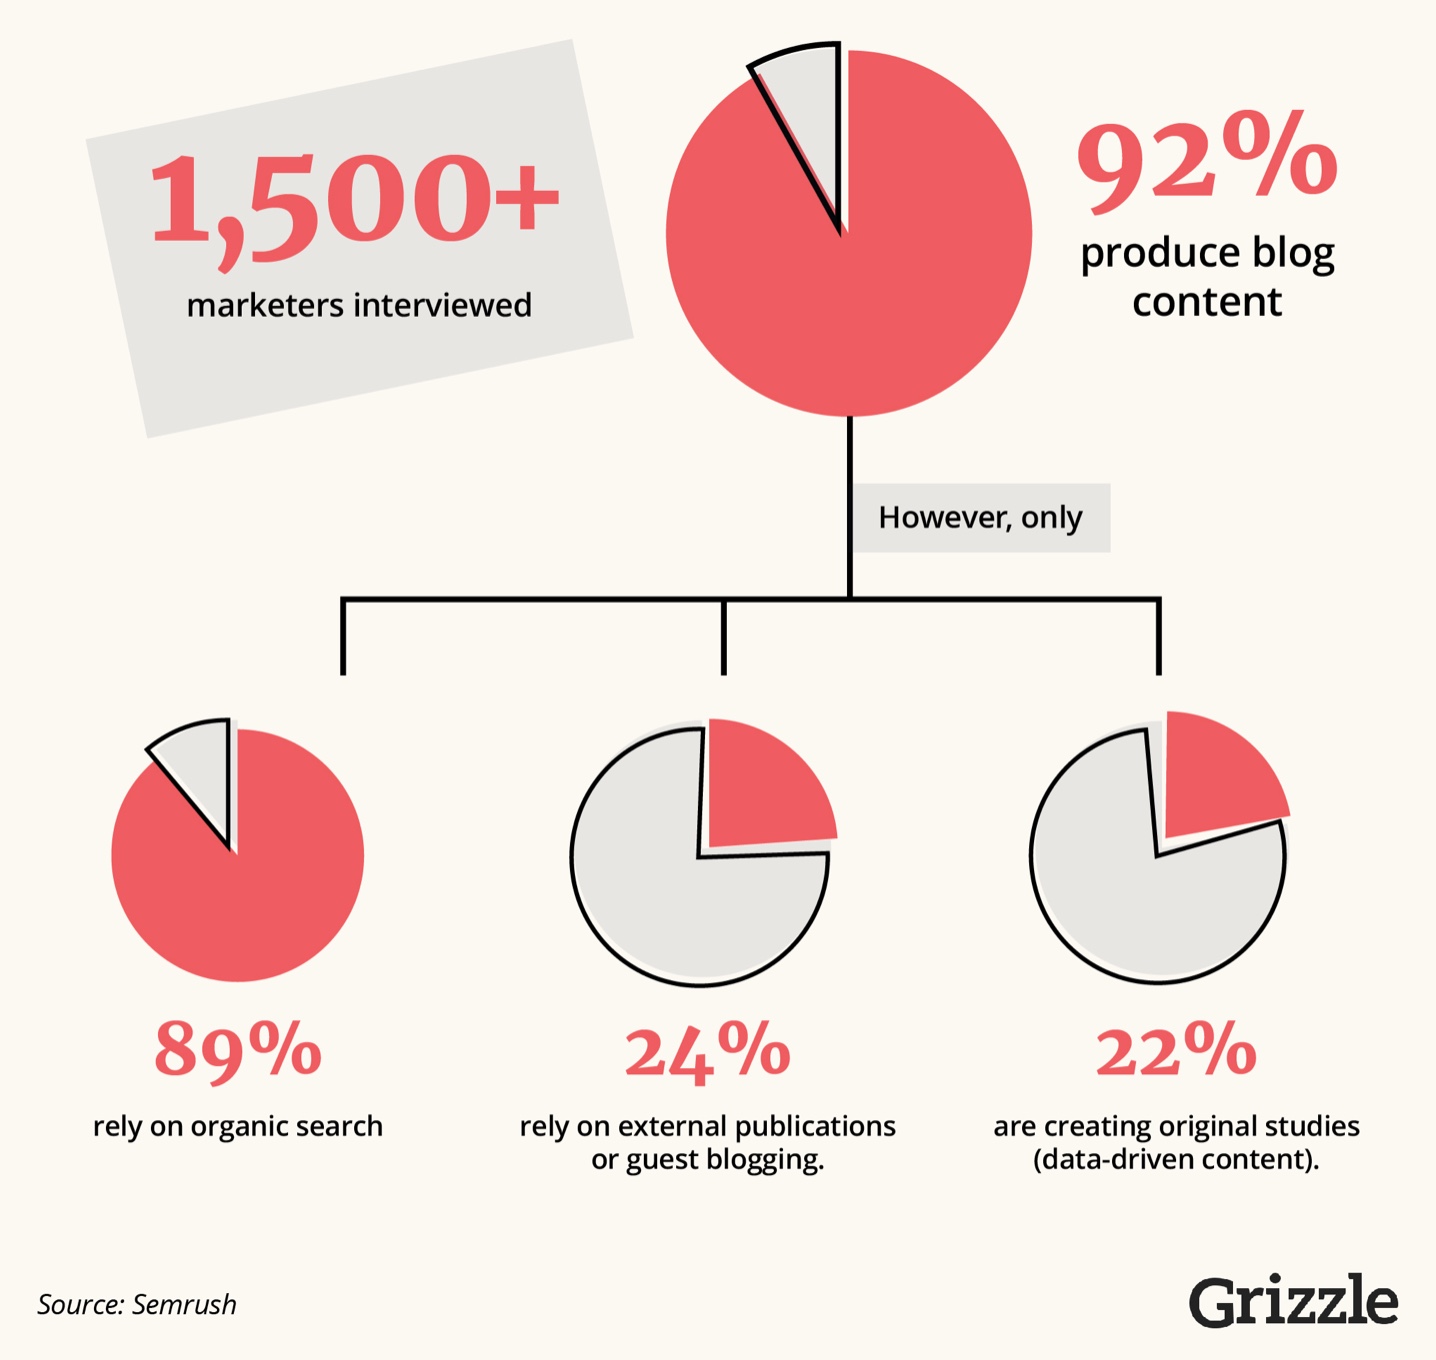 The infographic by Grizzle shows that out of 1,500 marketers interviewed: 92% produce blog content, 89% rely on organic search, 24% rely on external publications/guest blogging, and 22% are creating original studies.